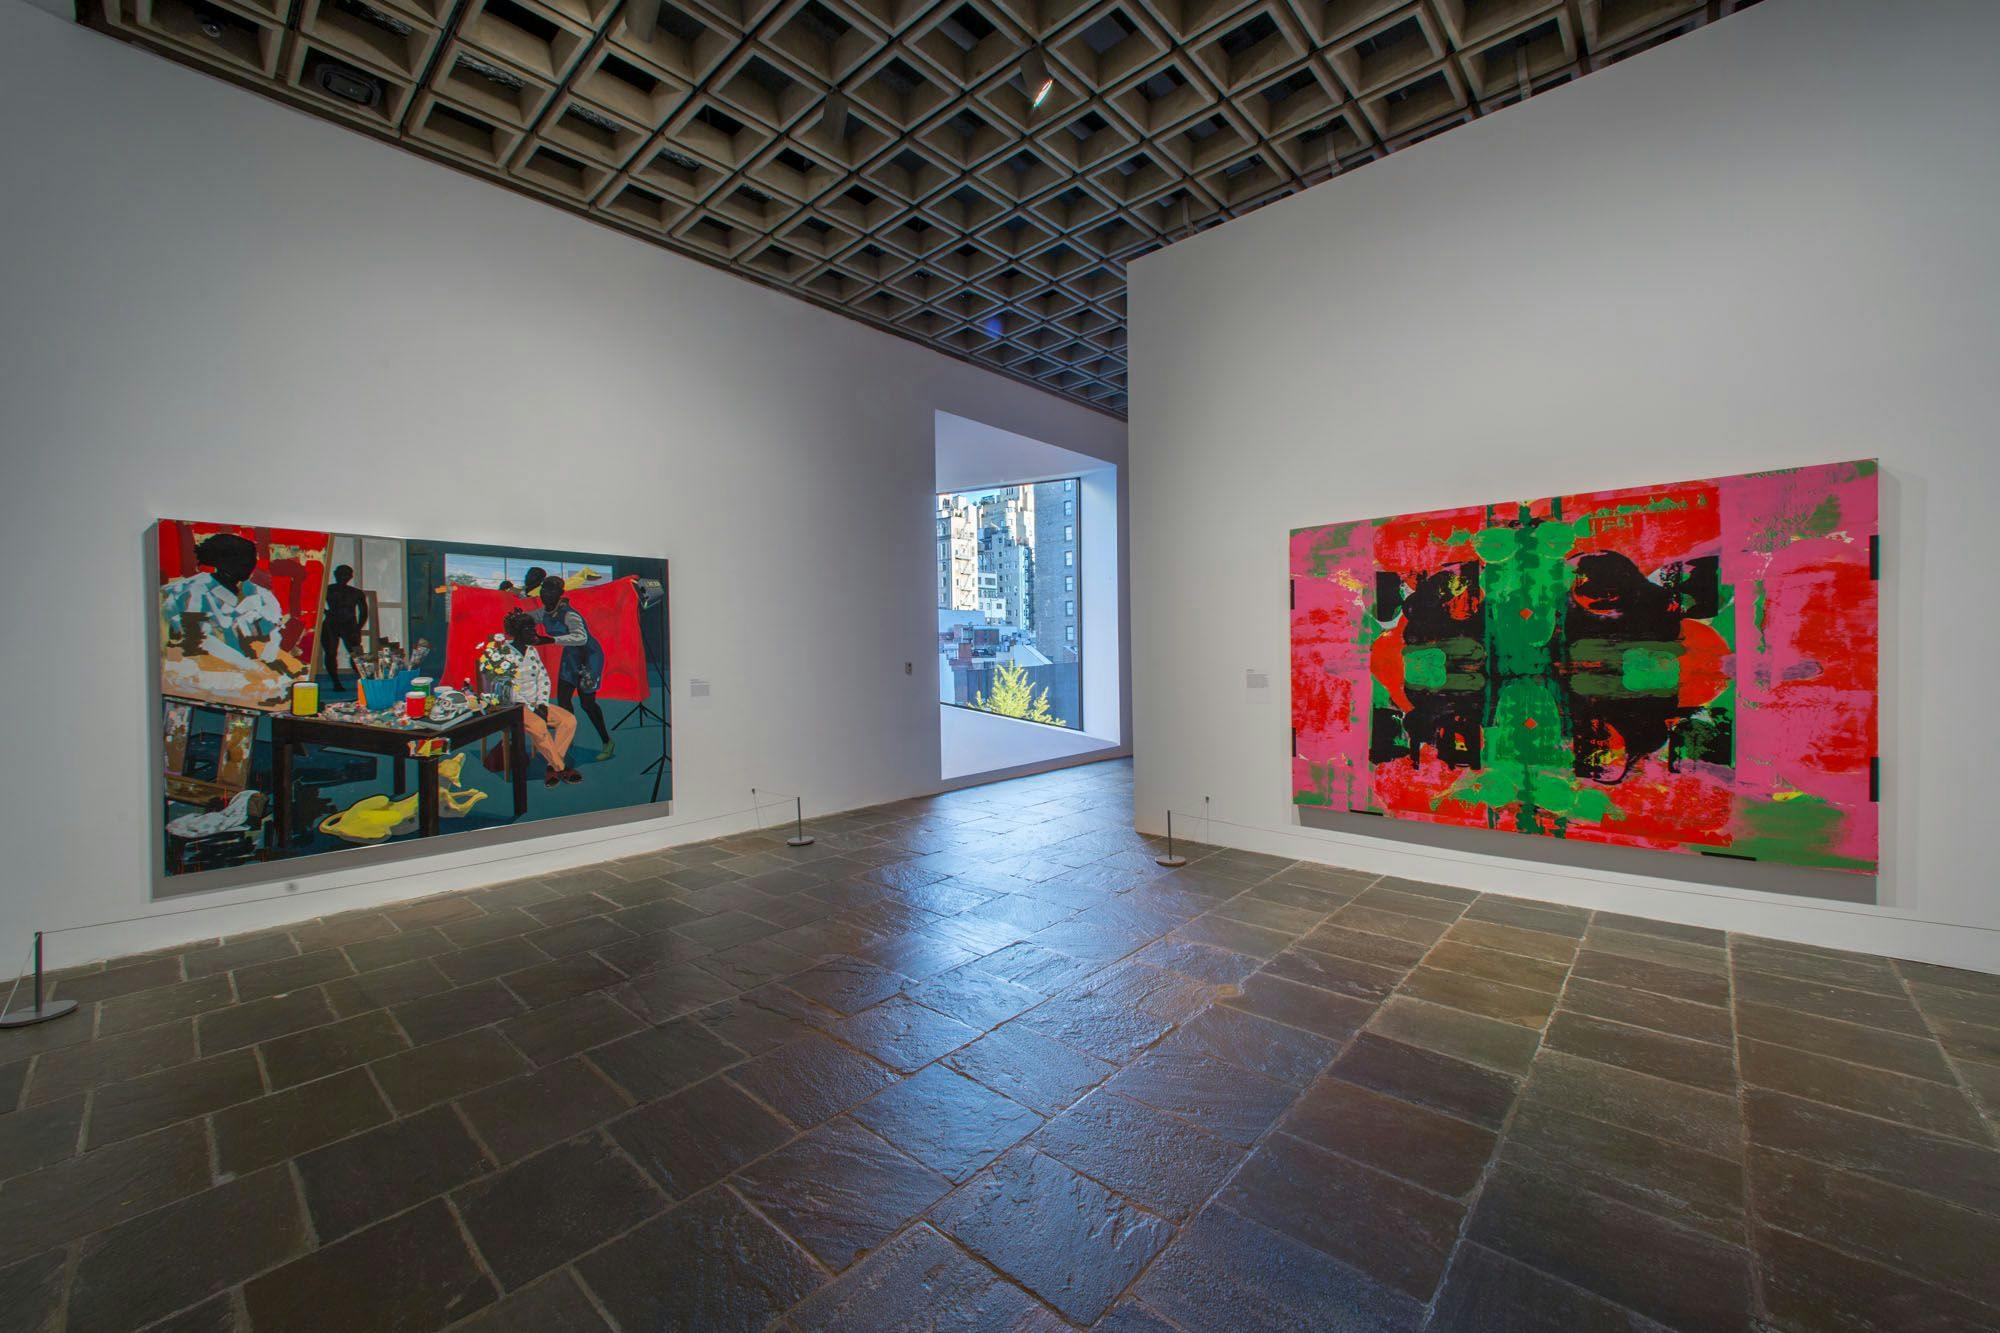 Installation view of the exhibition Kerry James Marshall: Mastry at the Met Breuer in New York, dated 2016 through 2017.